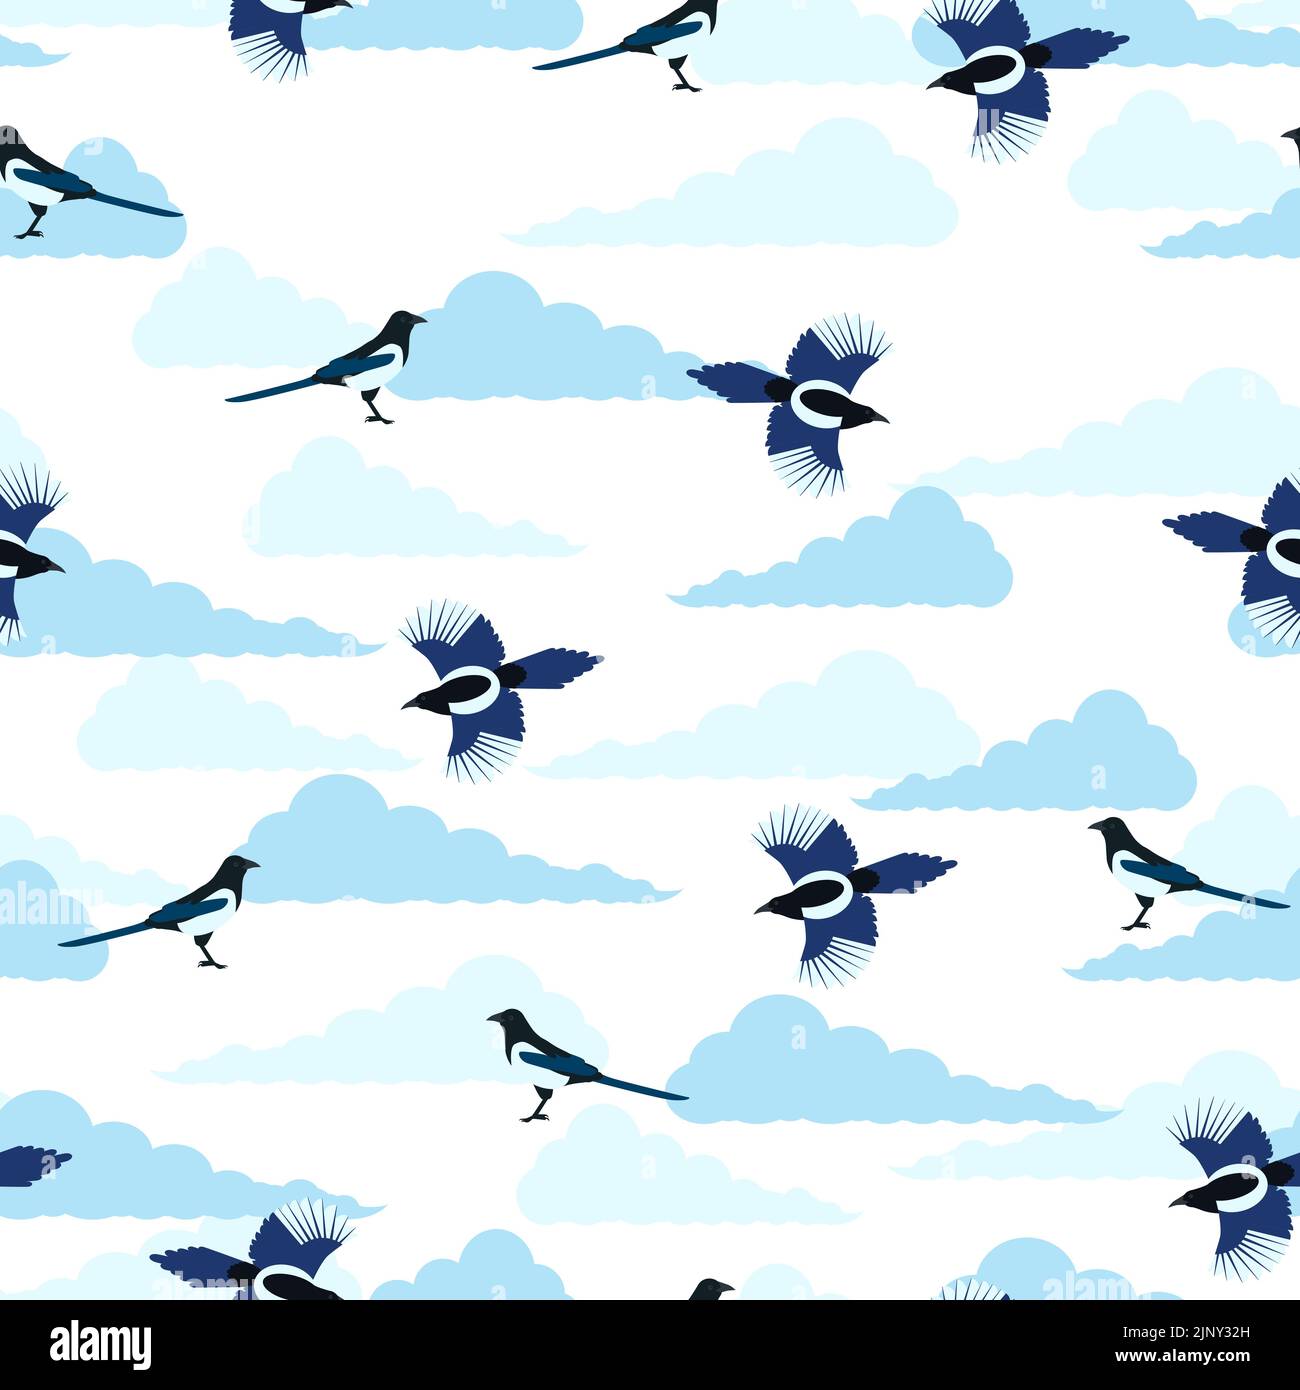 Cartoon pattern Chinese magpie in sky with clouds. The national bird of Korea is the magpie. Black and white long-tailed bird illustration. Wings and Stock Vector